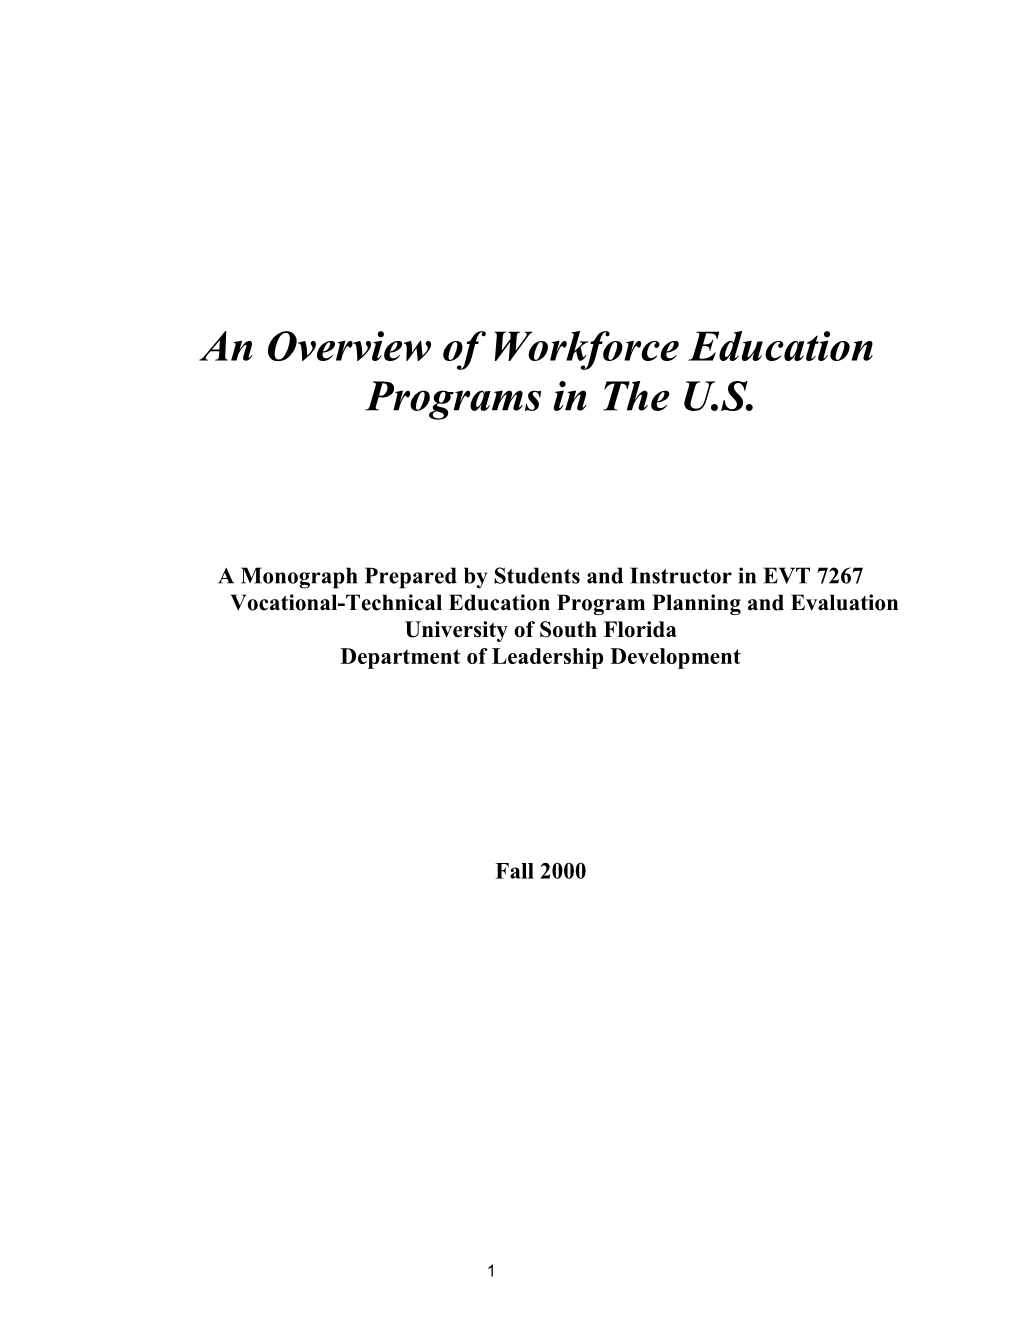 An Overview Of Workforce Education Programs In The U.S.